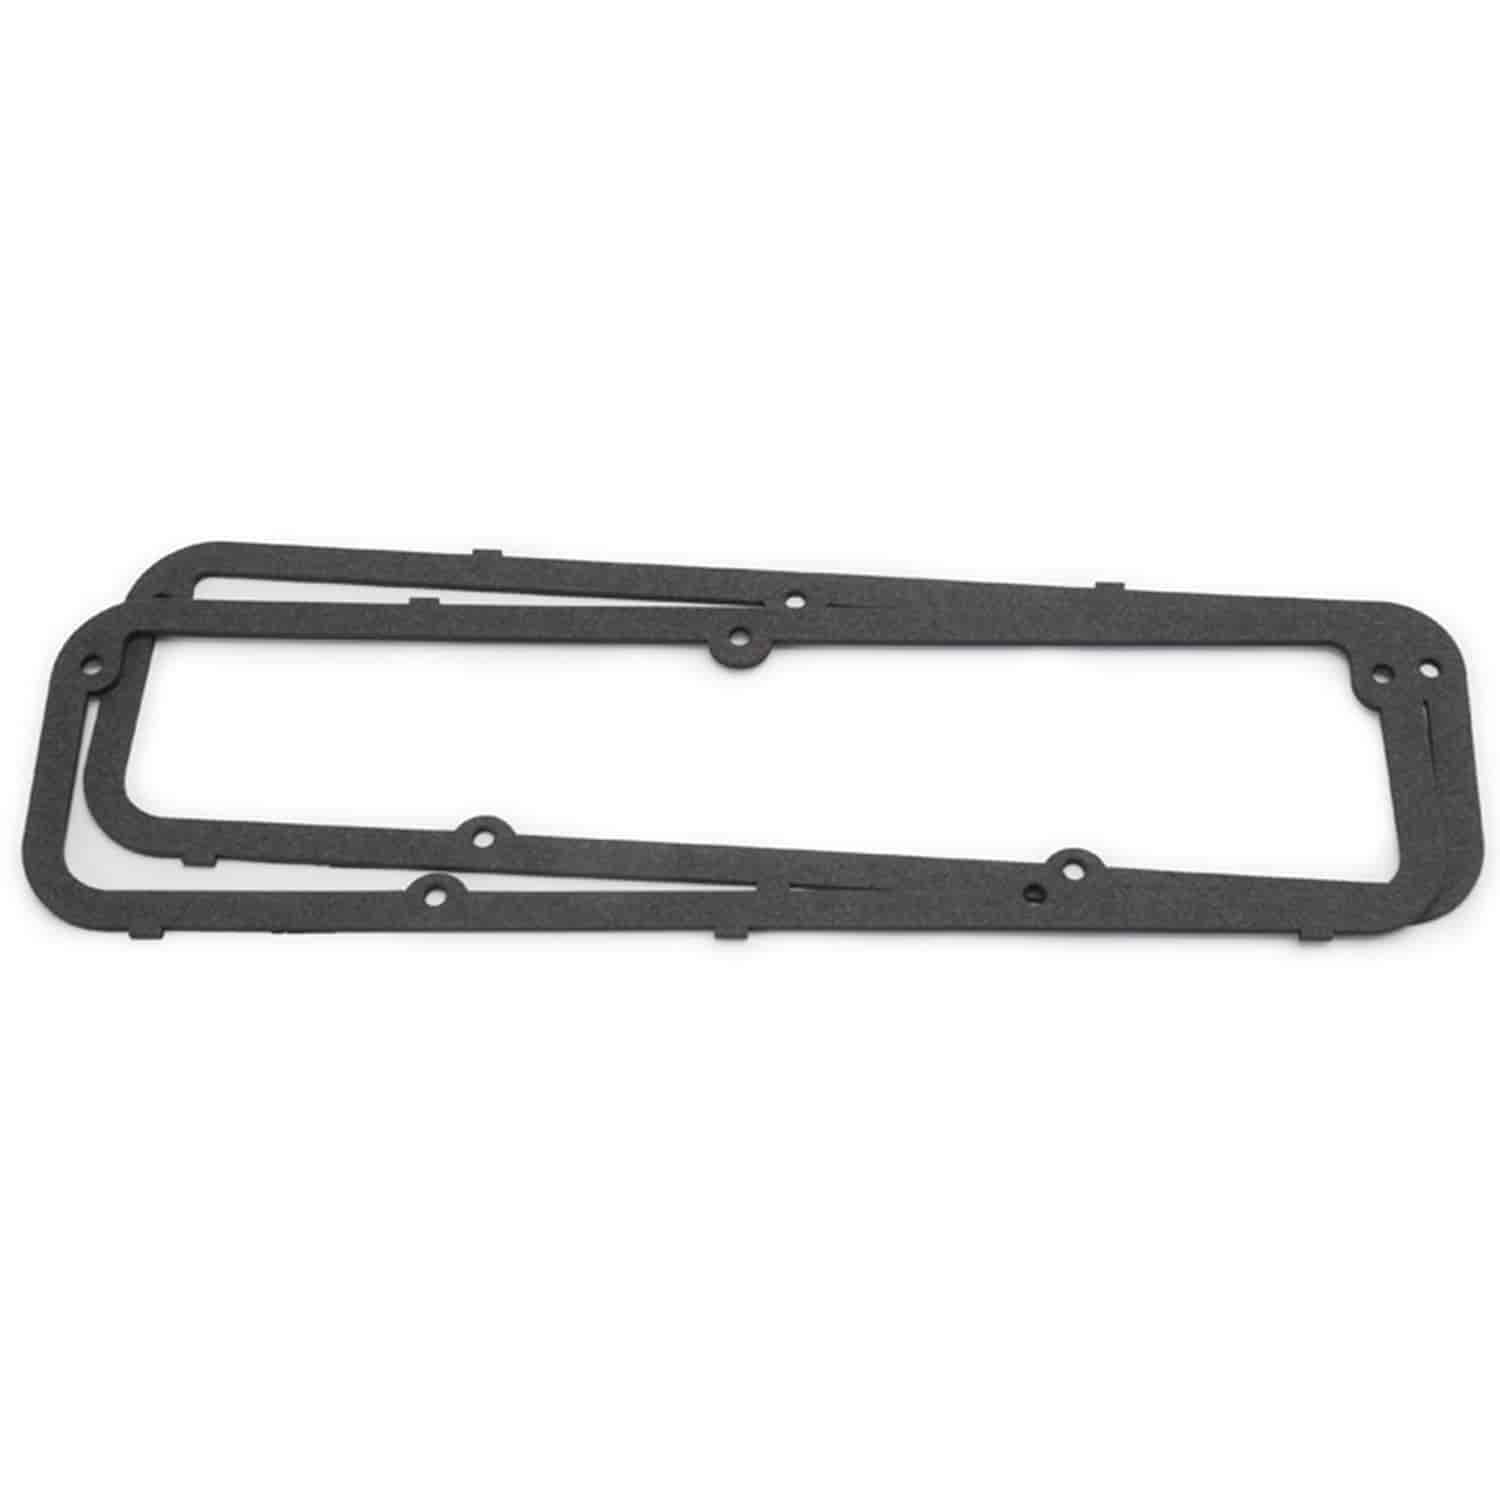 Valve Cover Gasket for Ford FE